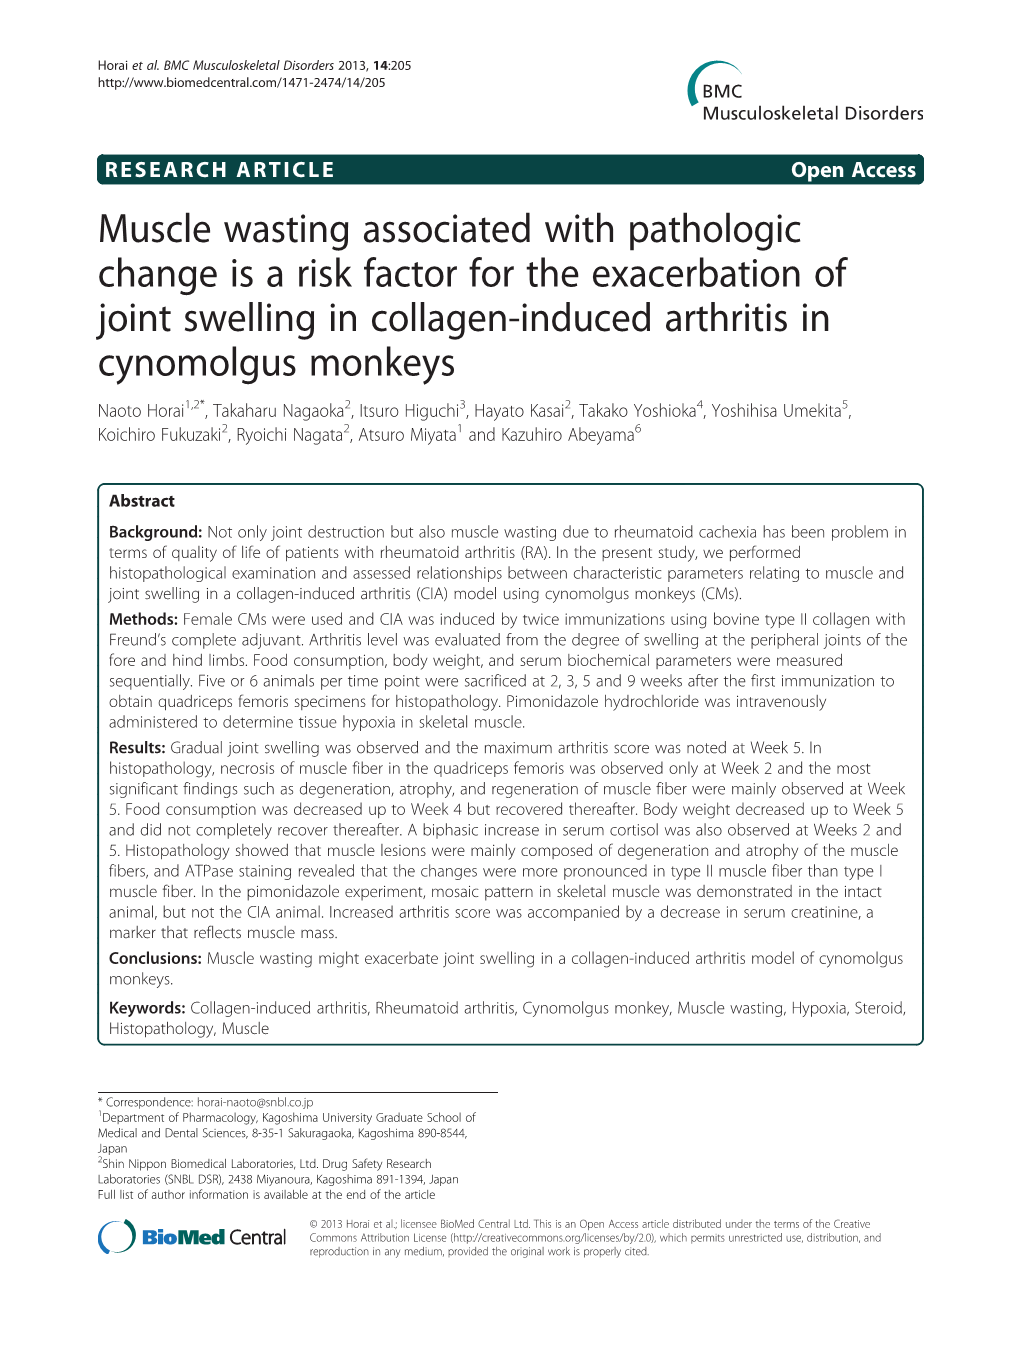 Muscle Wasting Associated with Pathologic Change Is a Risk Factor For